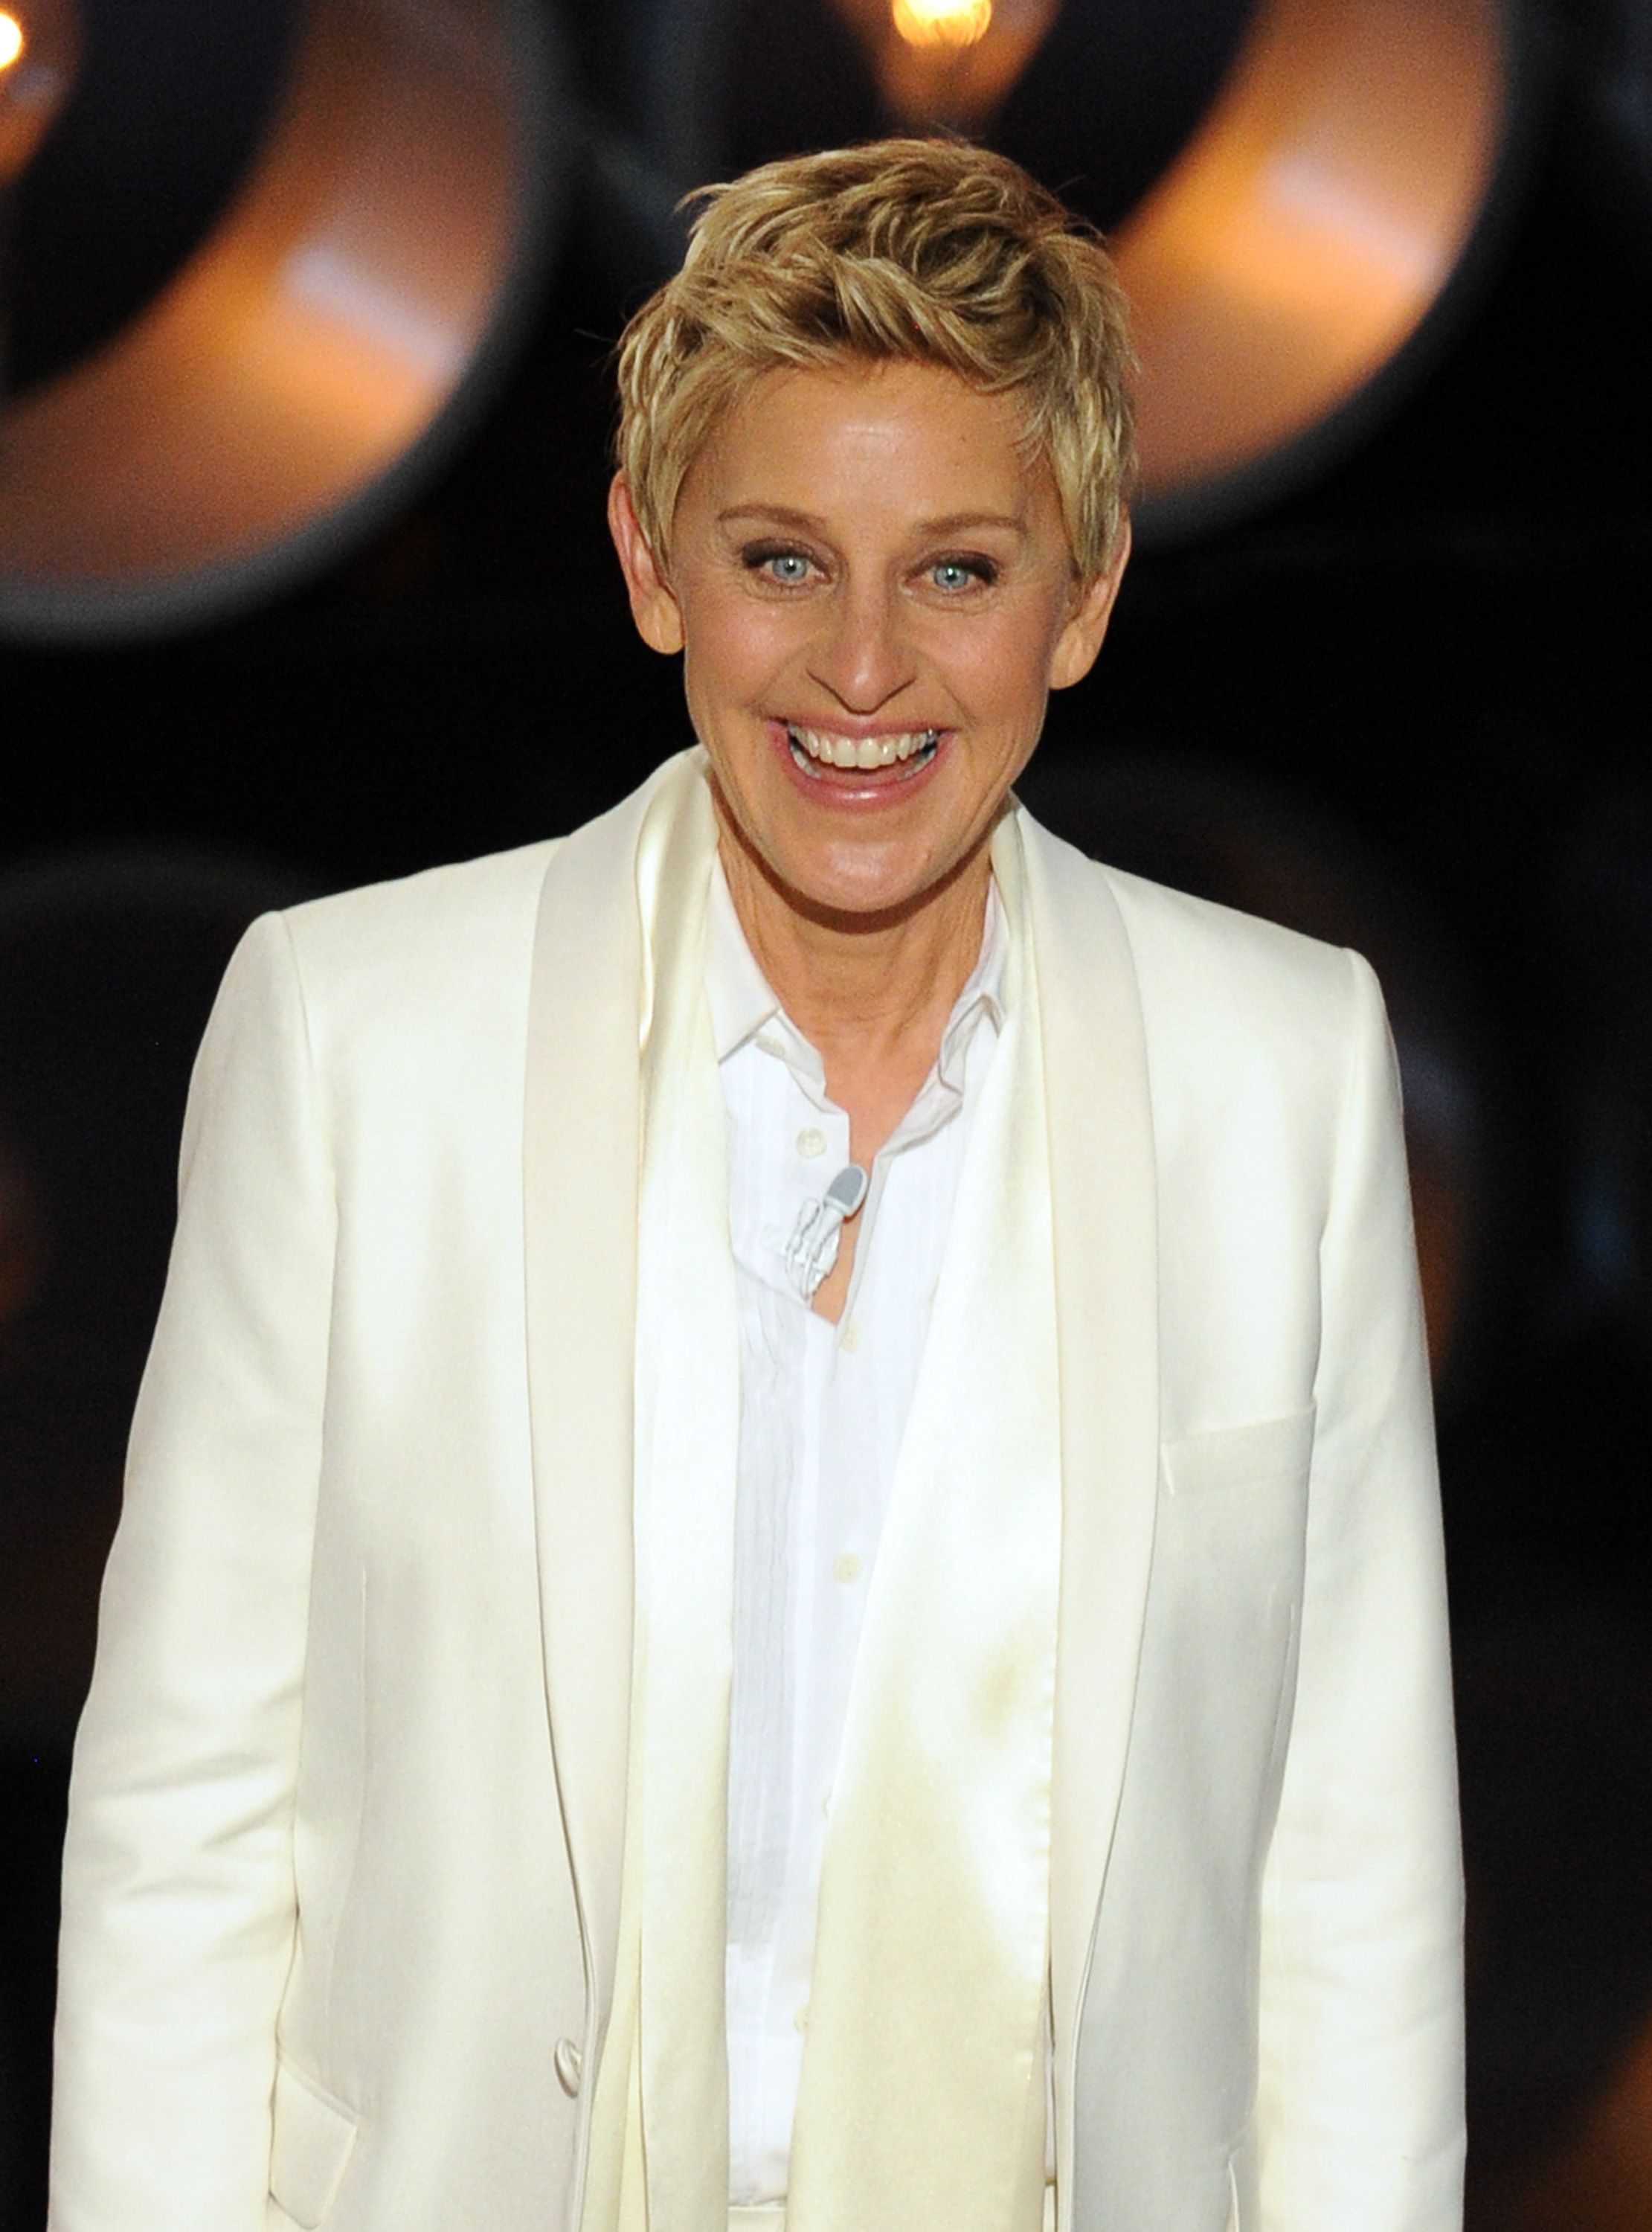 Ellen DeGeneres speaks onstage during the Oscars at the Dolby Theatre on March 2, 2014 | Photo: Getty Images